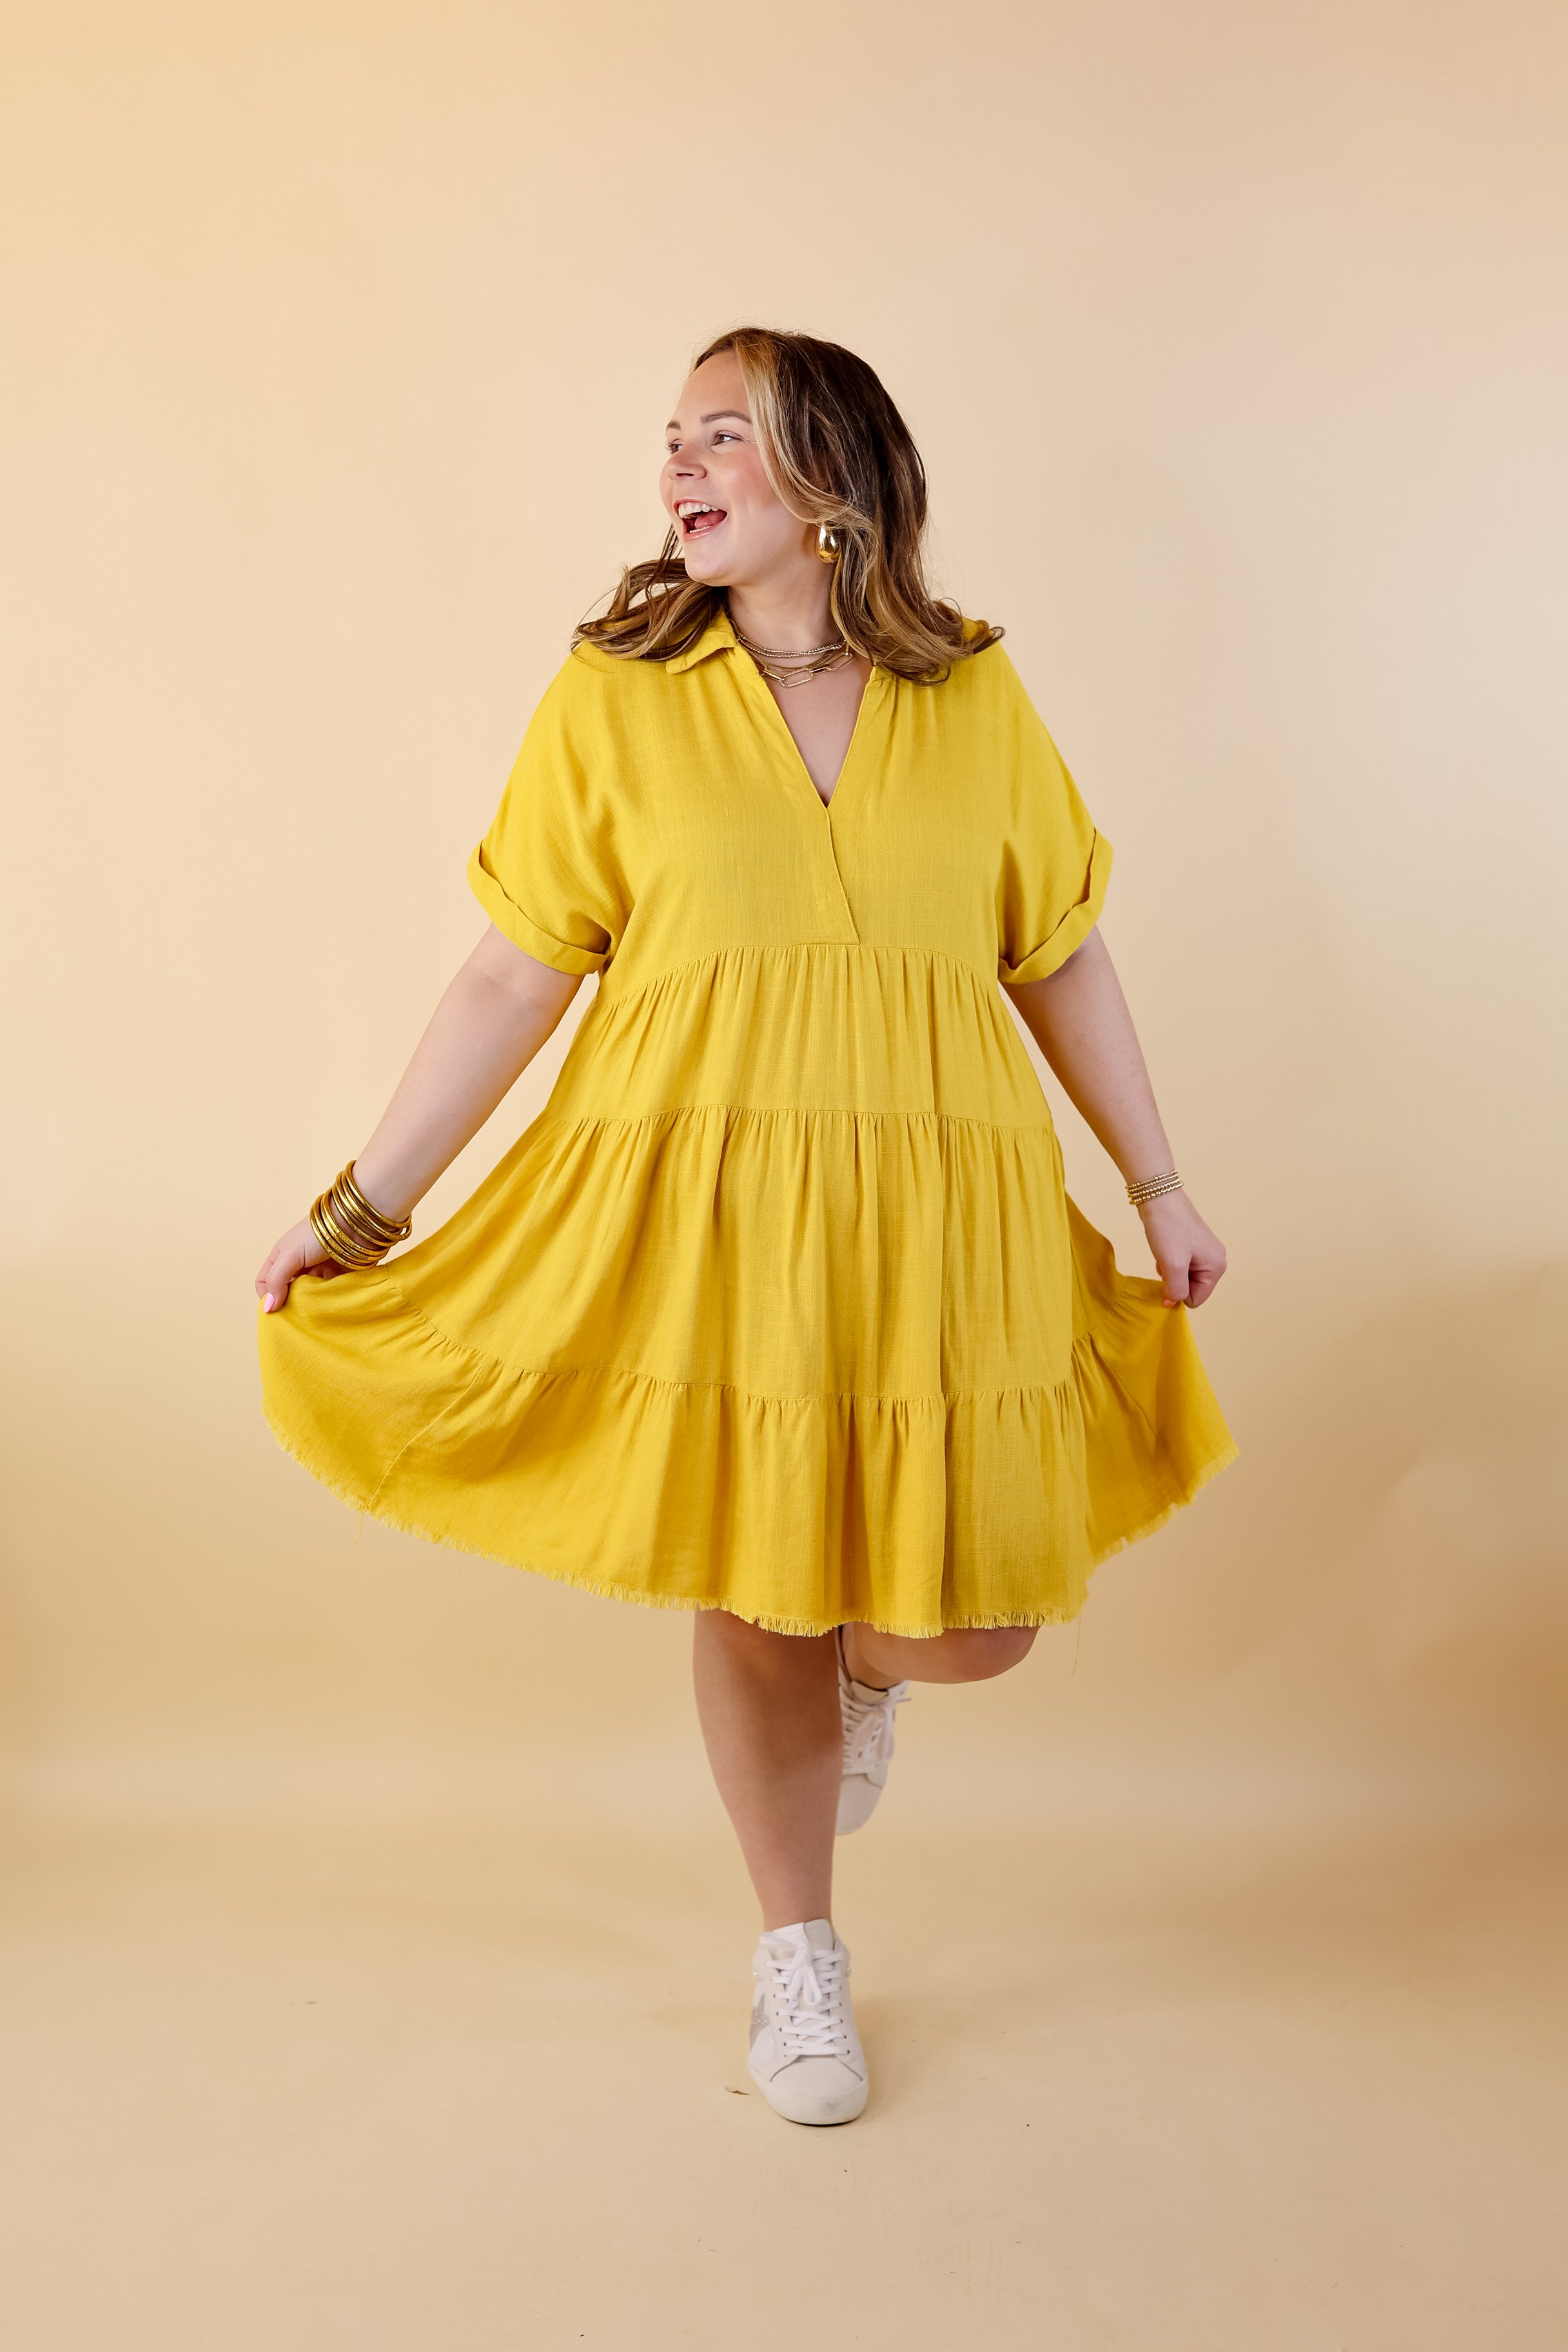 Taos Transitions Ruffle Tiered Collared Dress with Frayed Hem in Yellow - Giddy Up Glamour Boutique